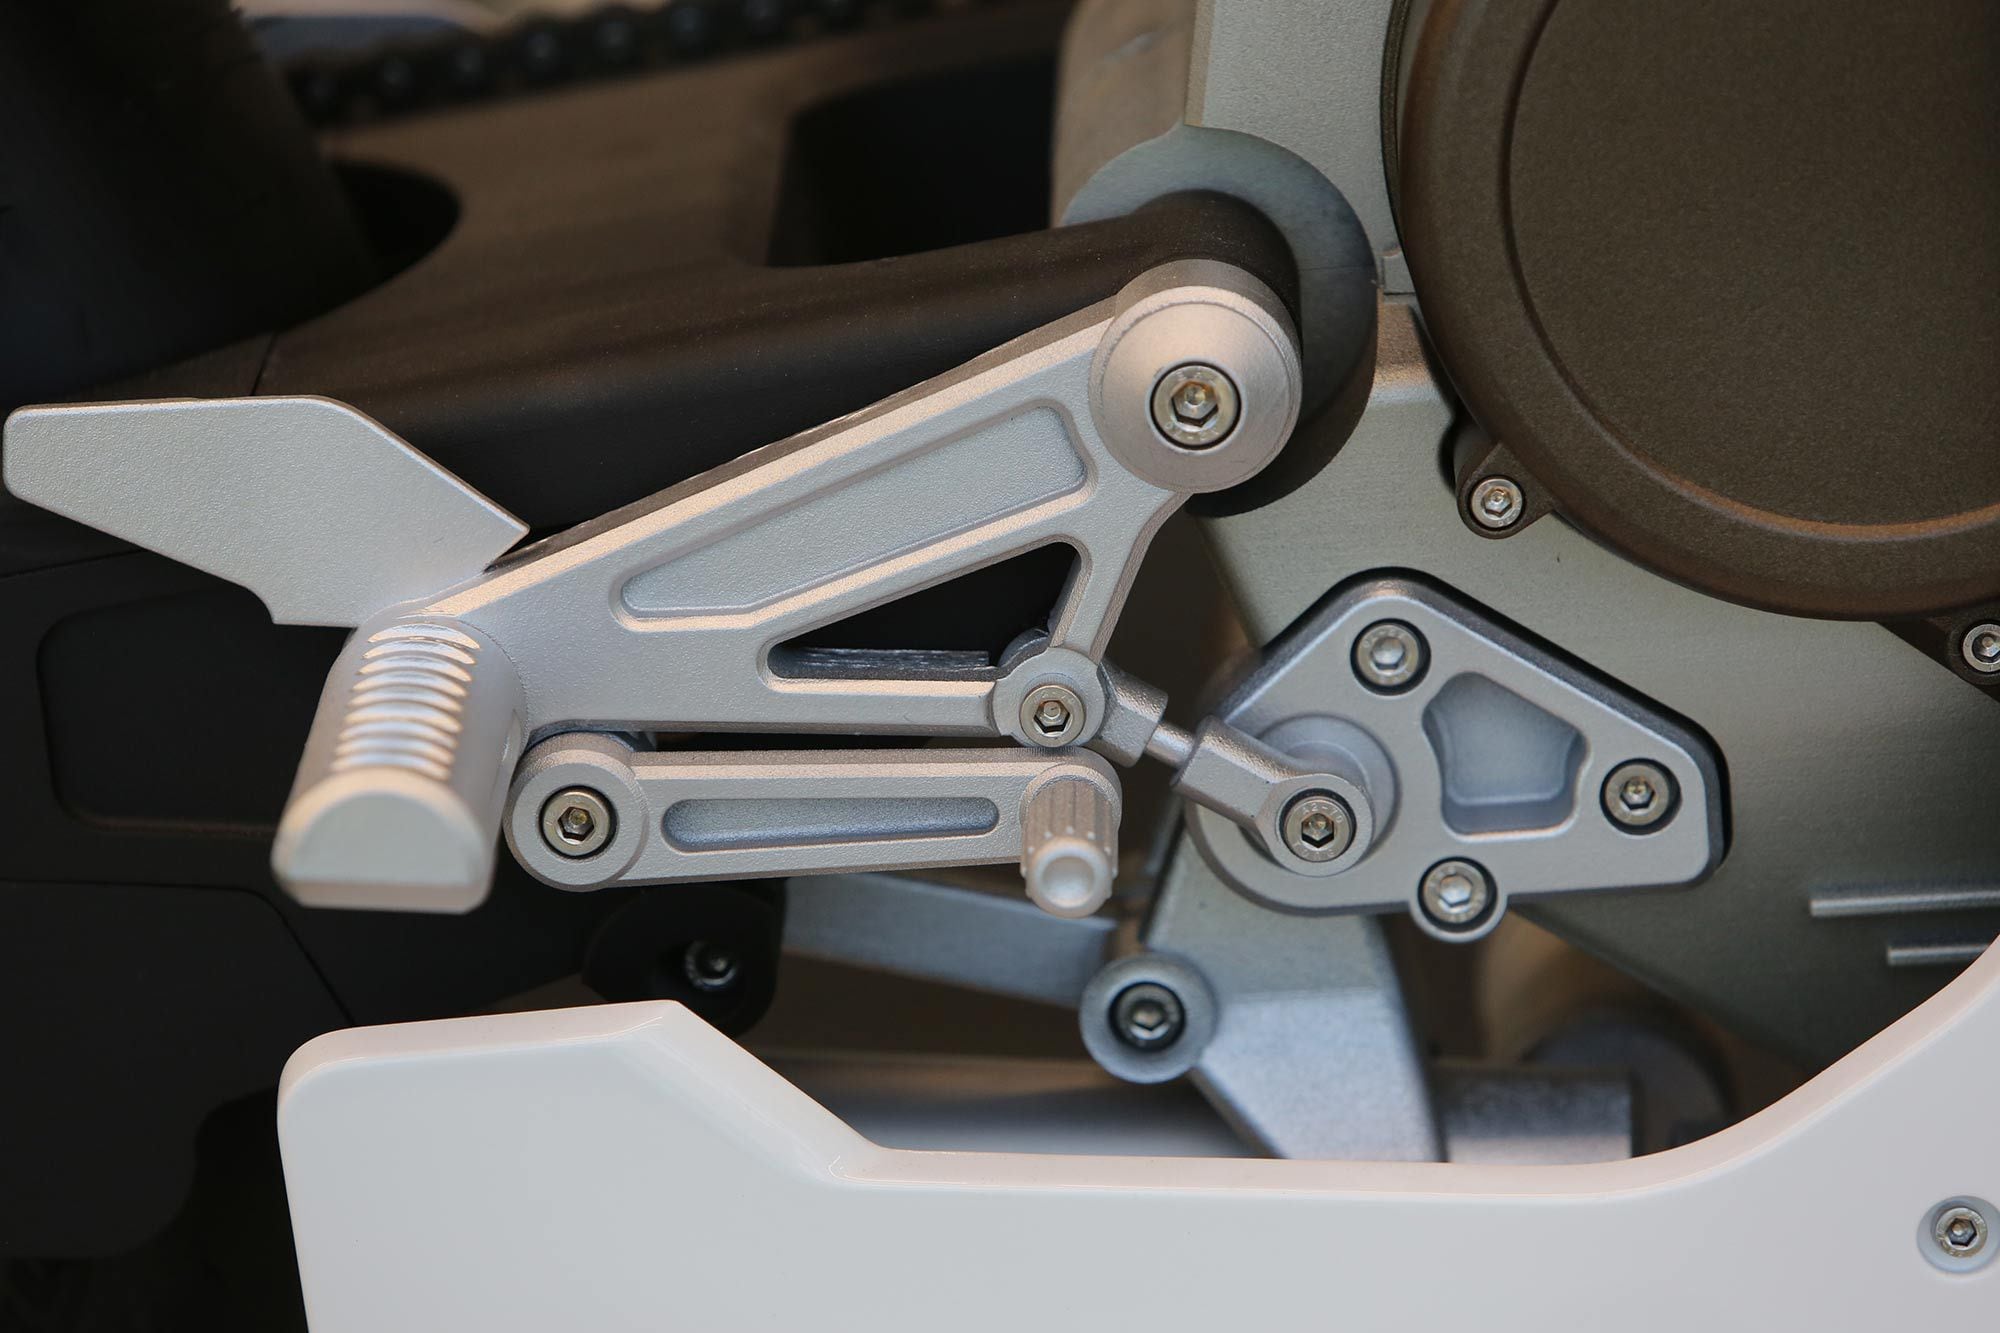 Exquisite 3D printing is evident throughout, as on these lovely adjustable footpegs.